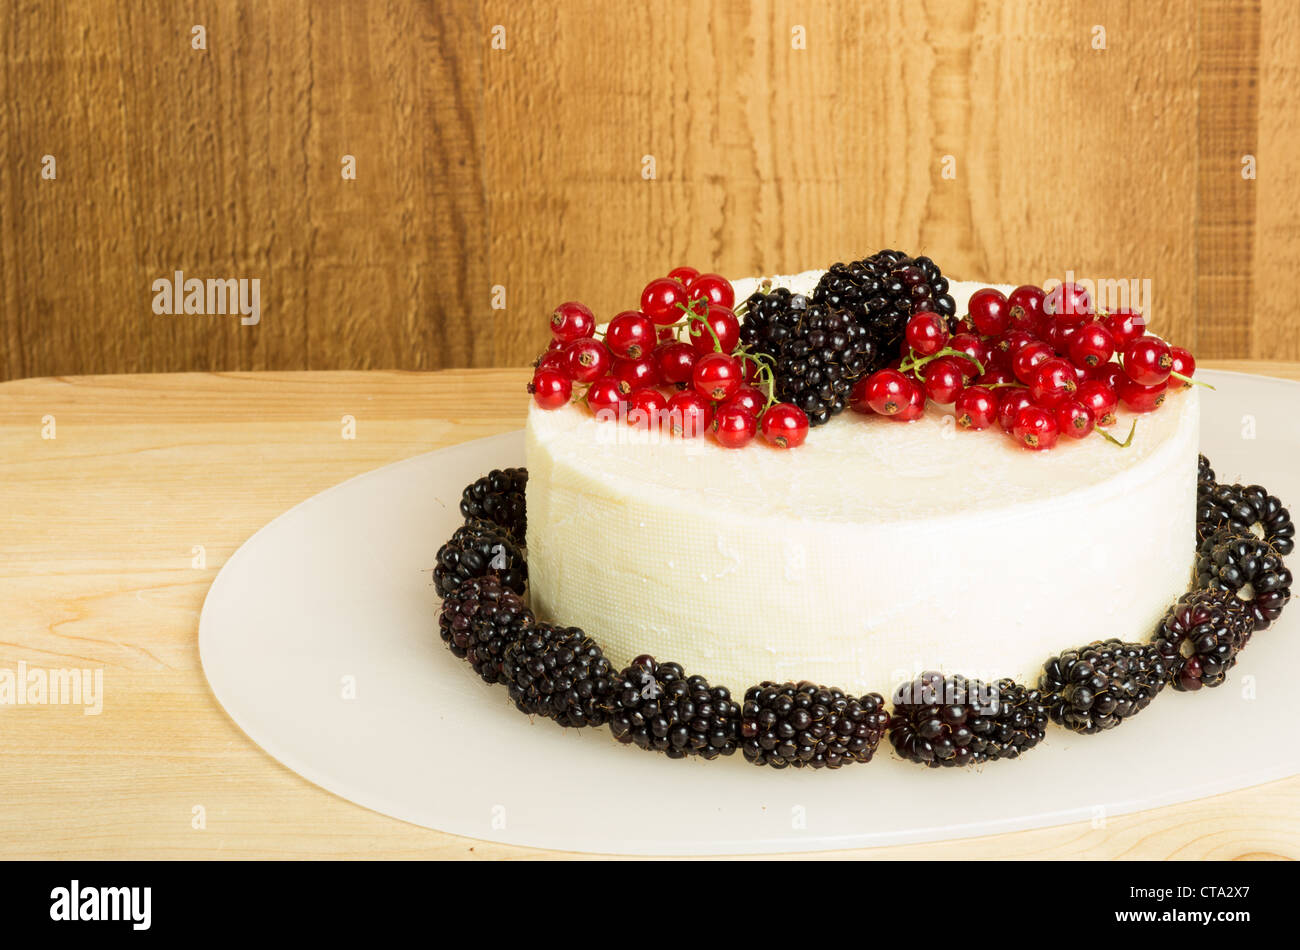 White cheddar cheese garnished with currants and blackberries Stock Photo